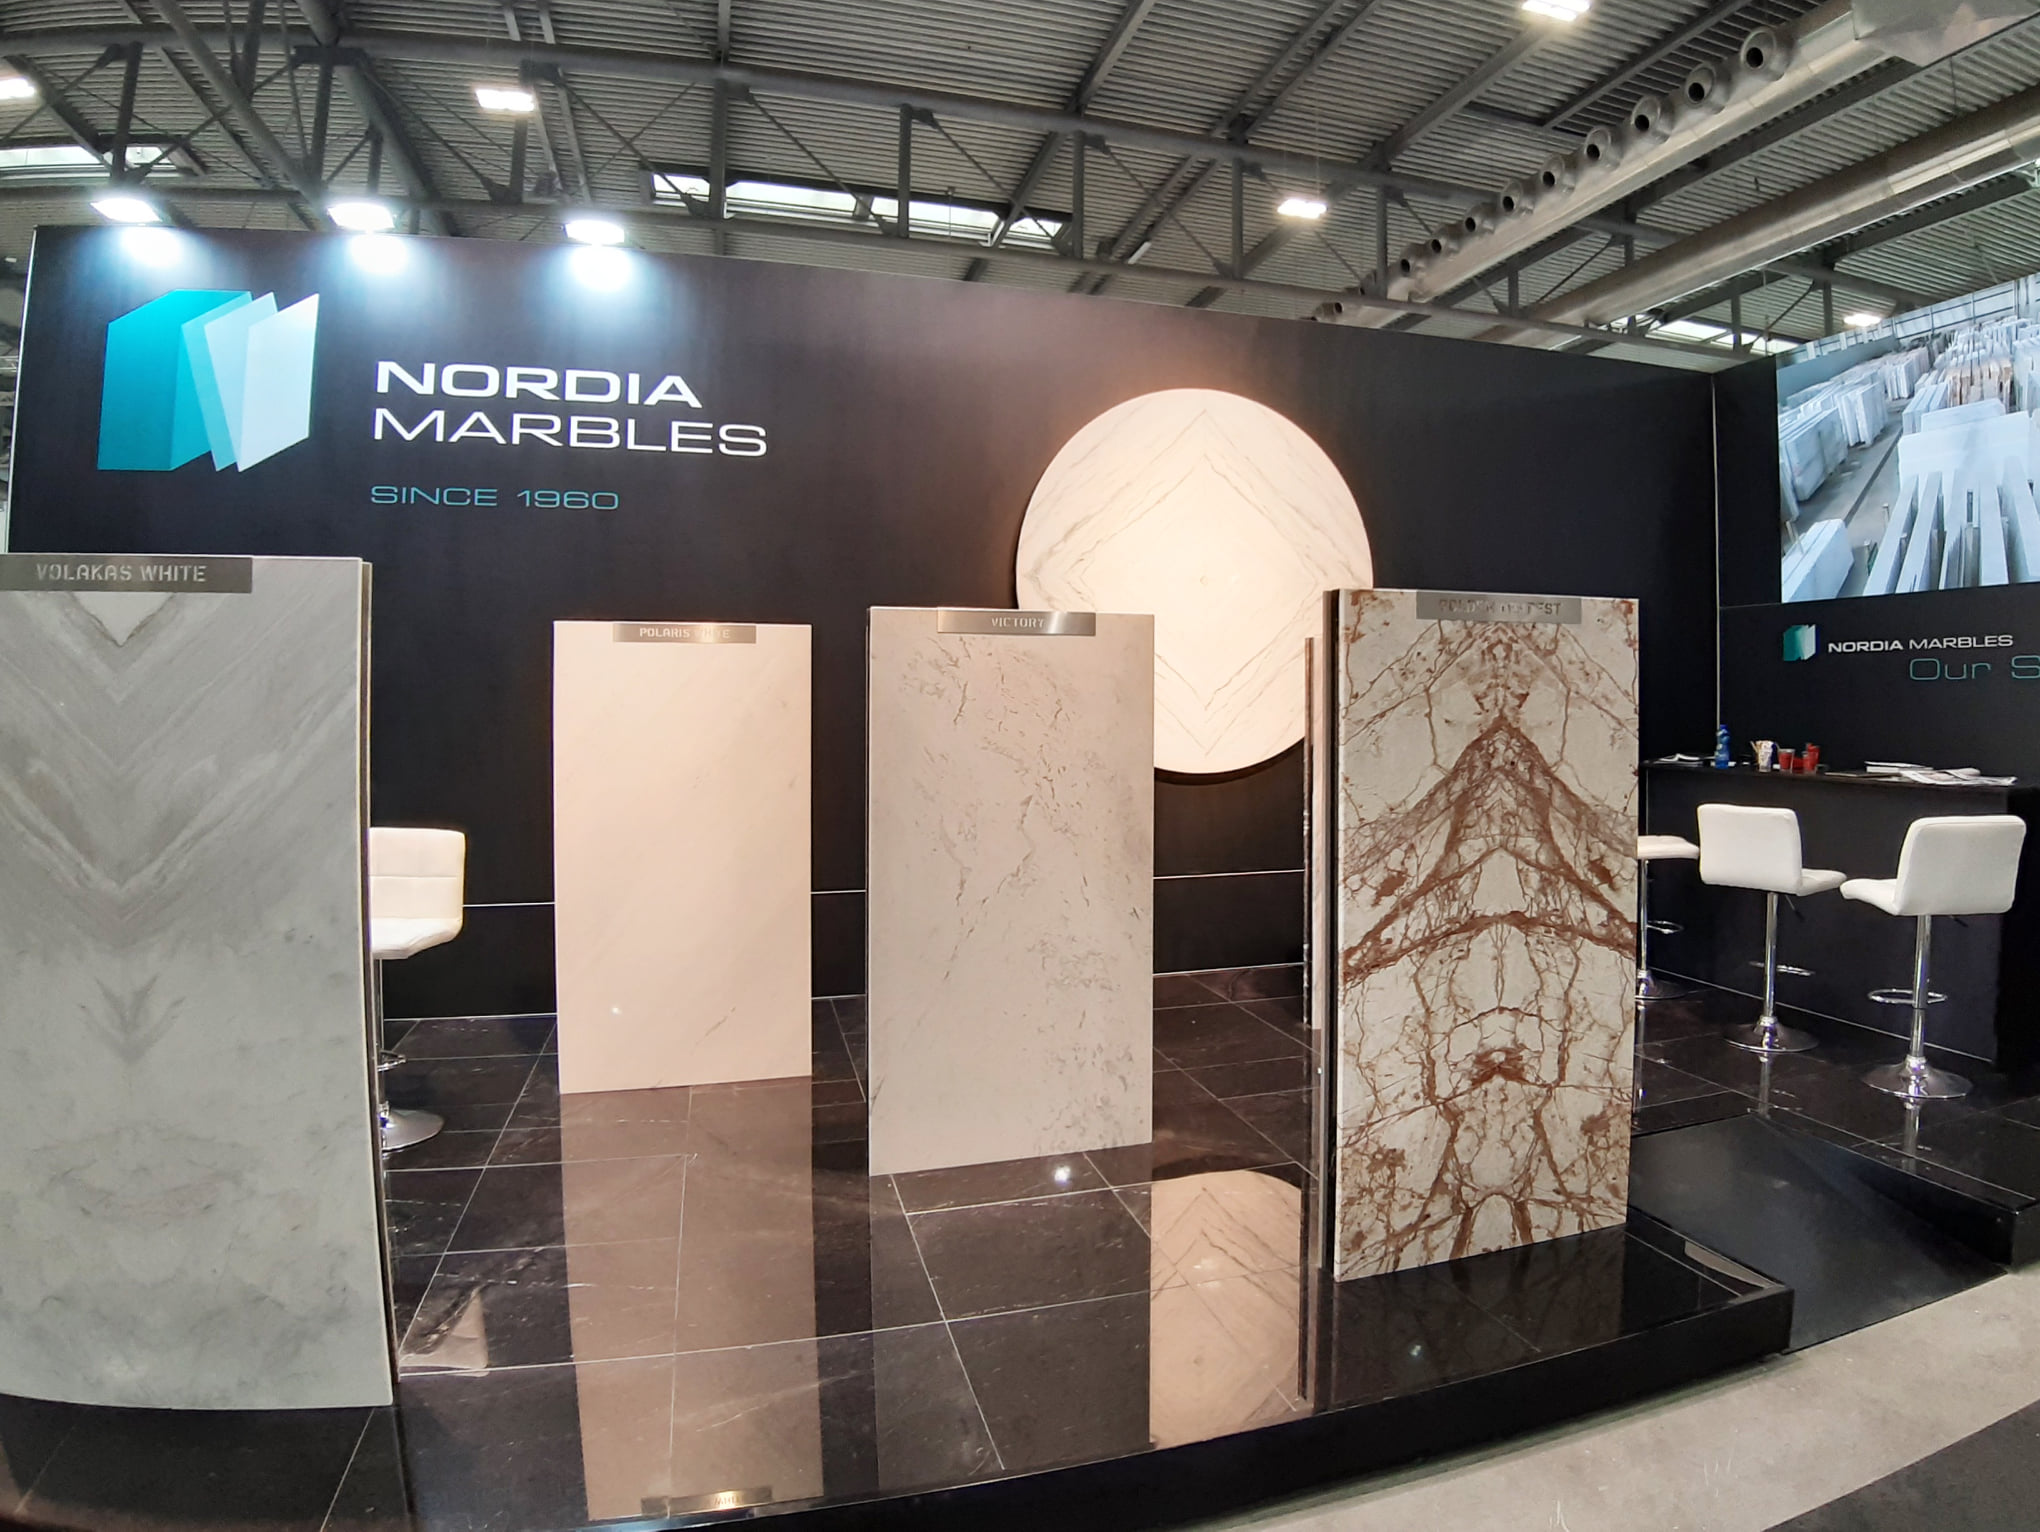 NORDIA MARBLES participated in the International Trade Fair Marmomac 2019